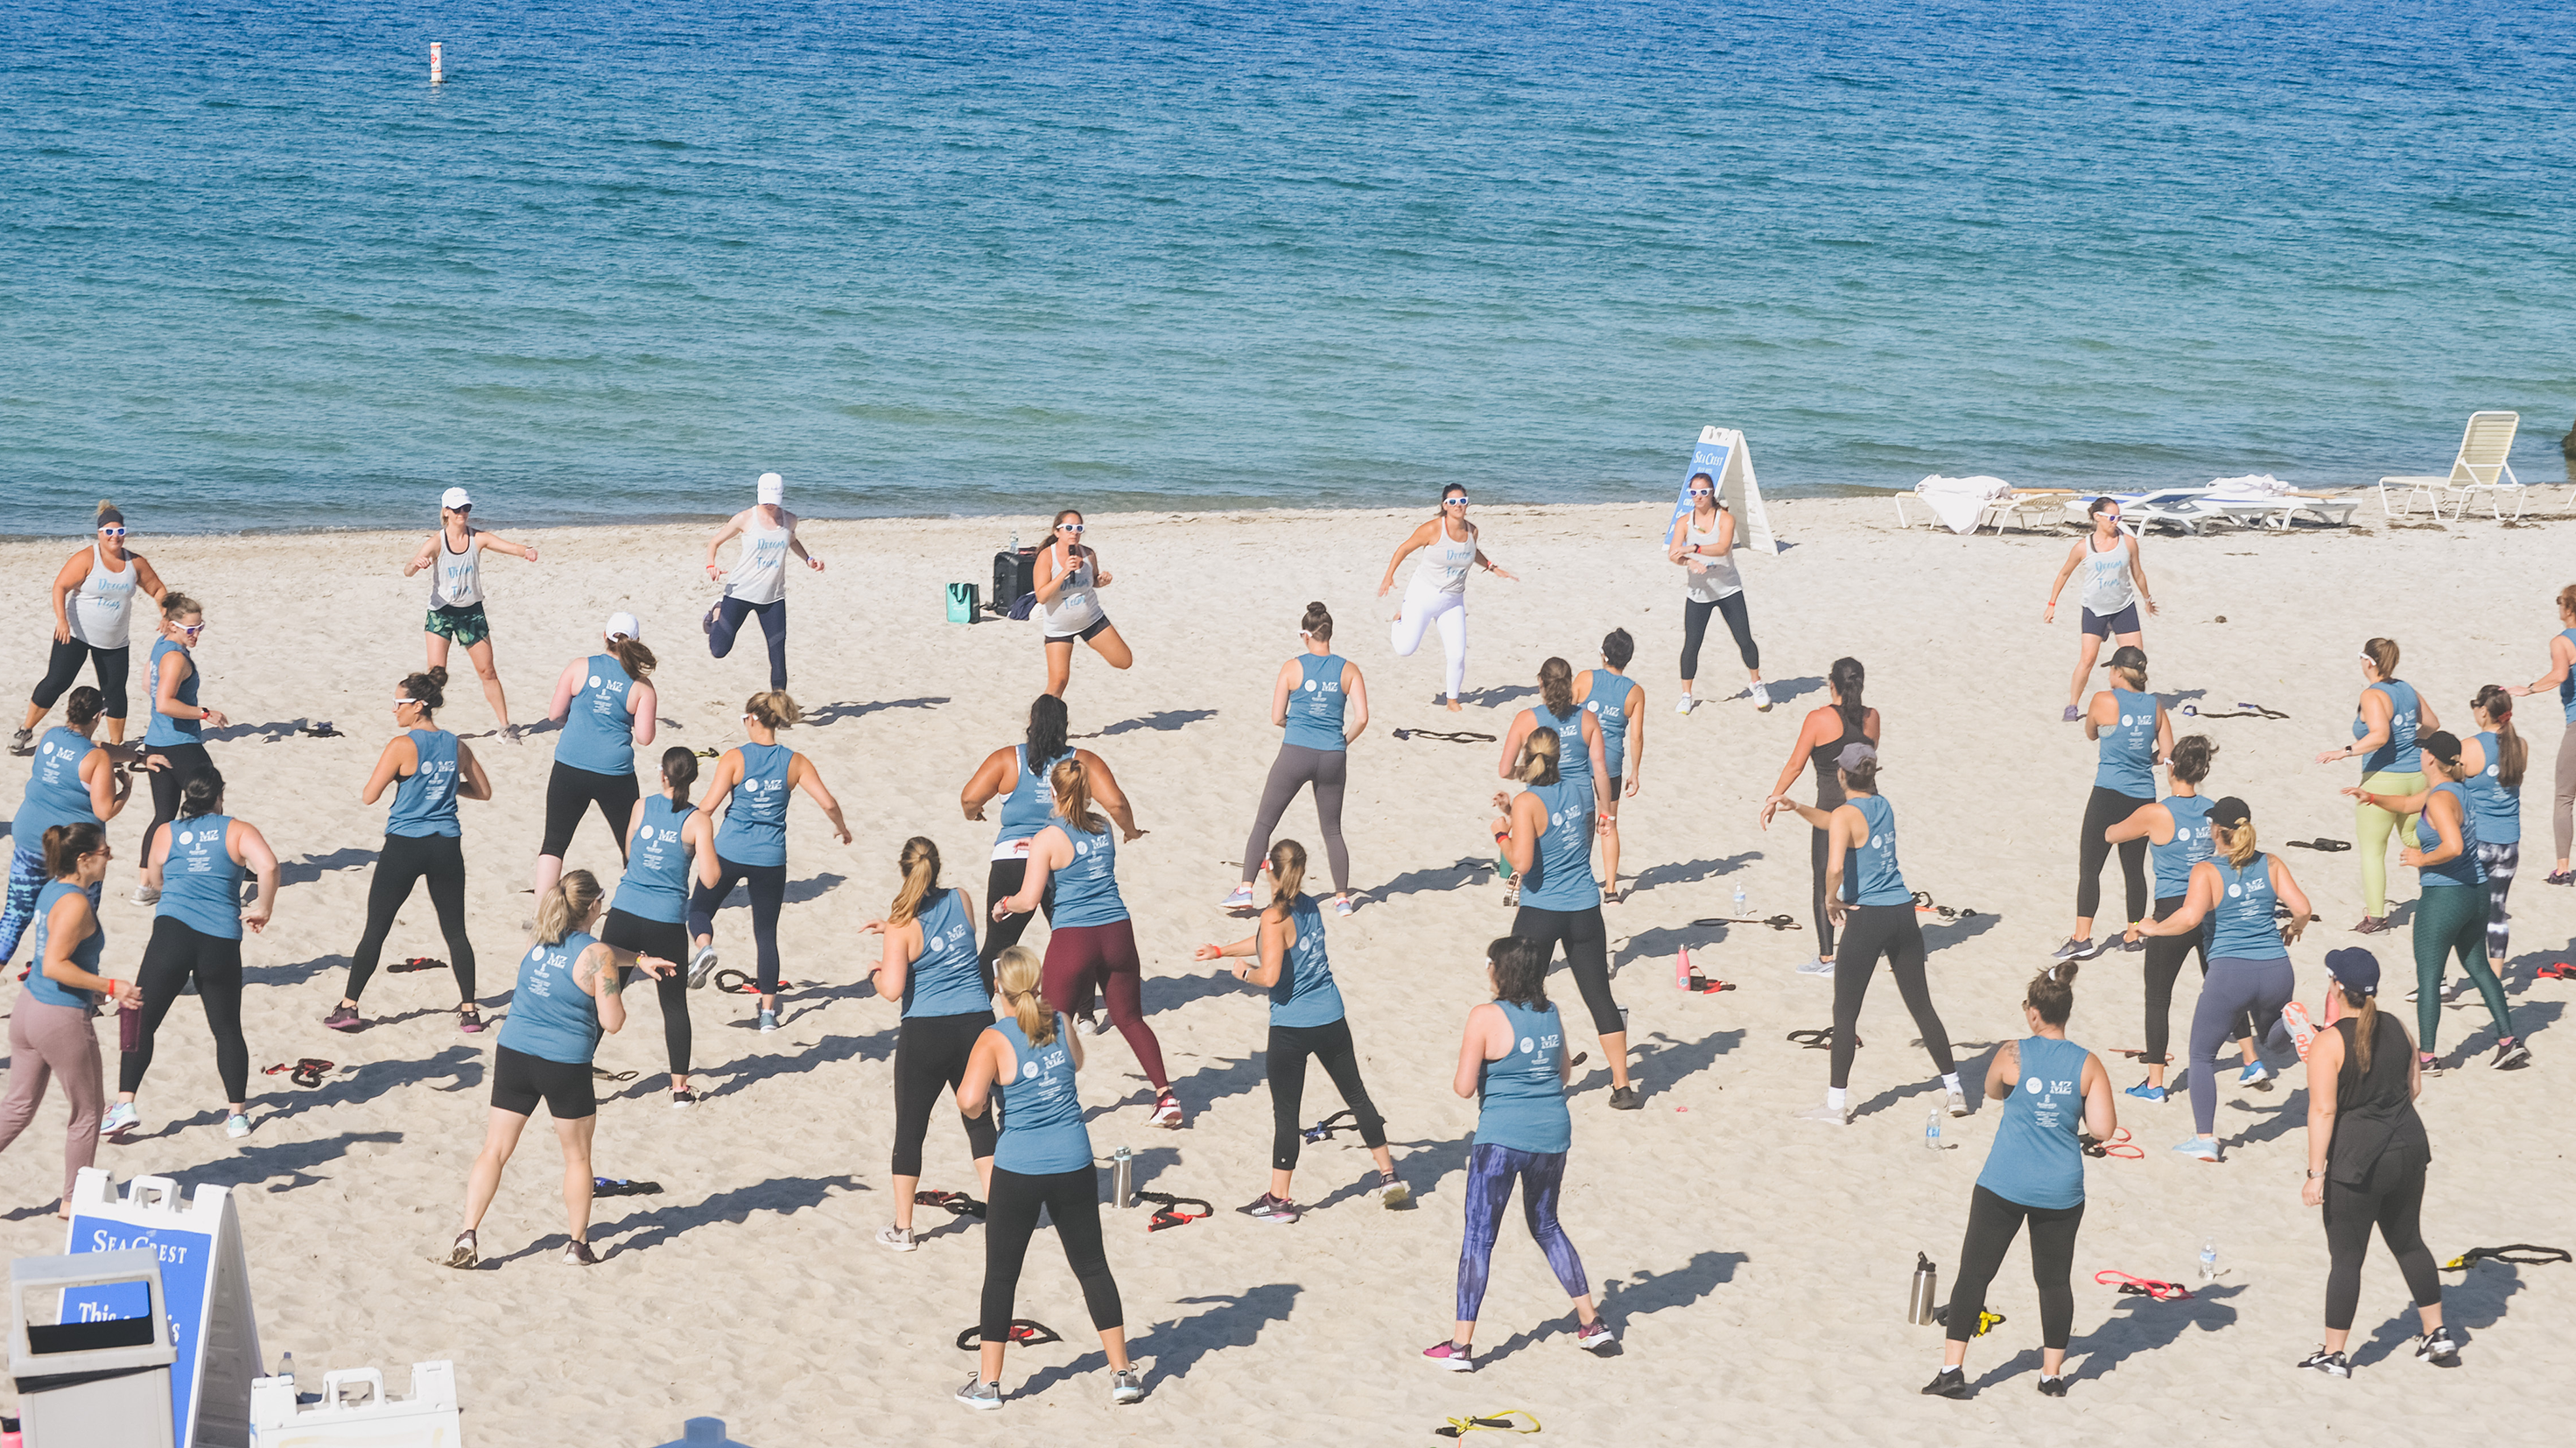 The Mama Beasts group of about 30-40 women in matching blue shirts participate in a group fitness class on the beach on a bright, sunny day. 